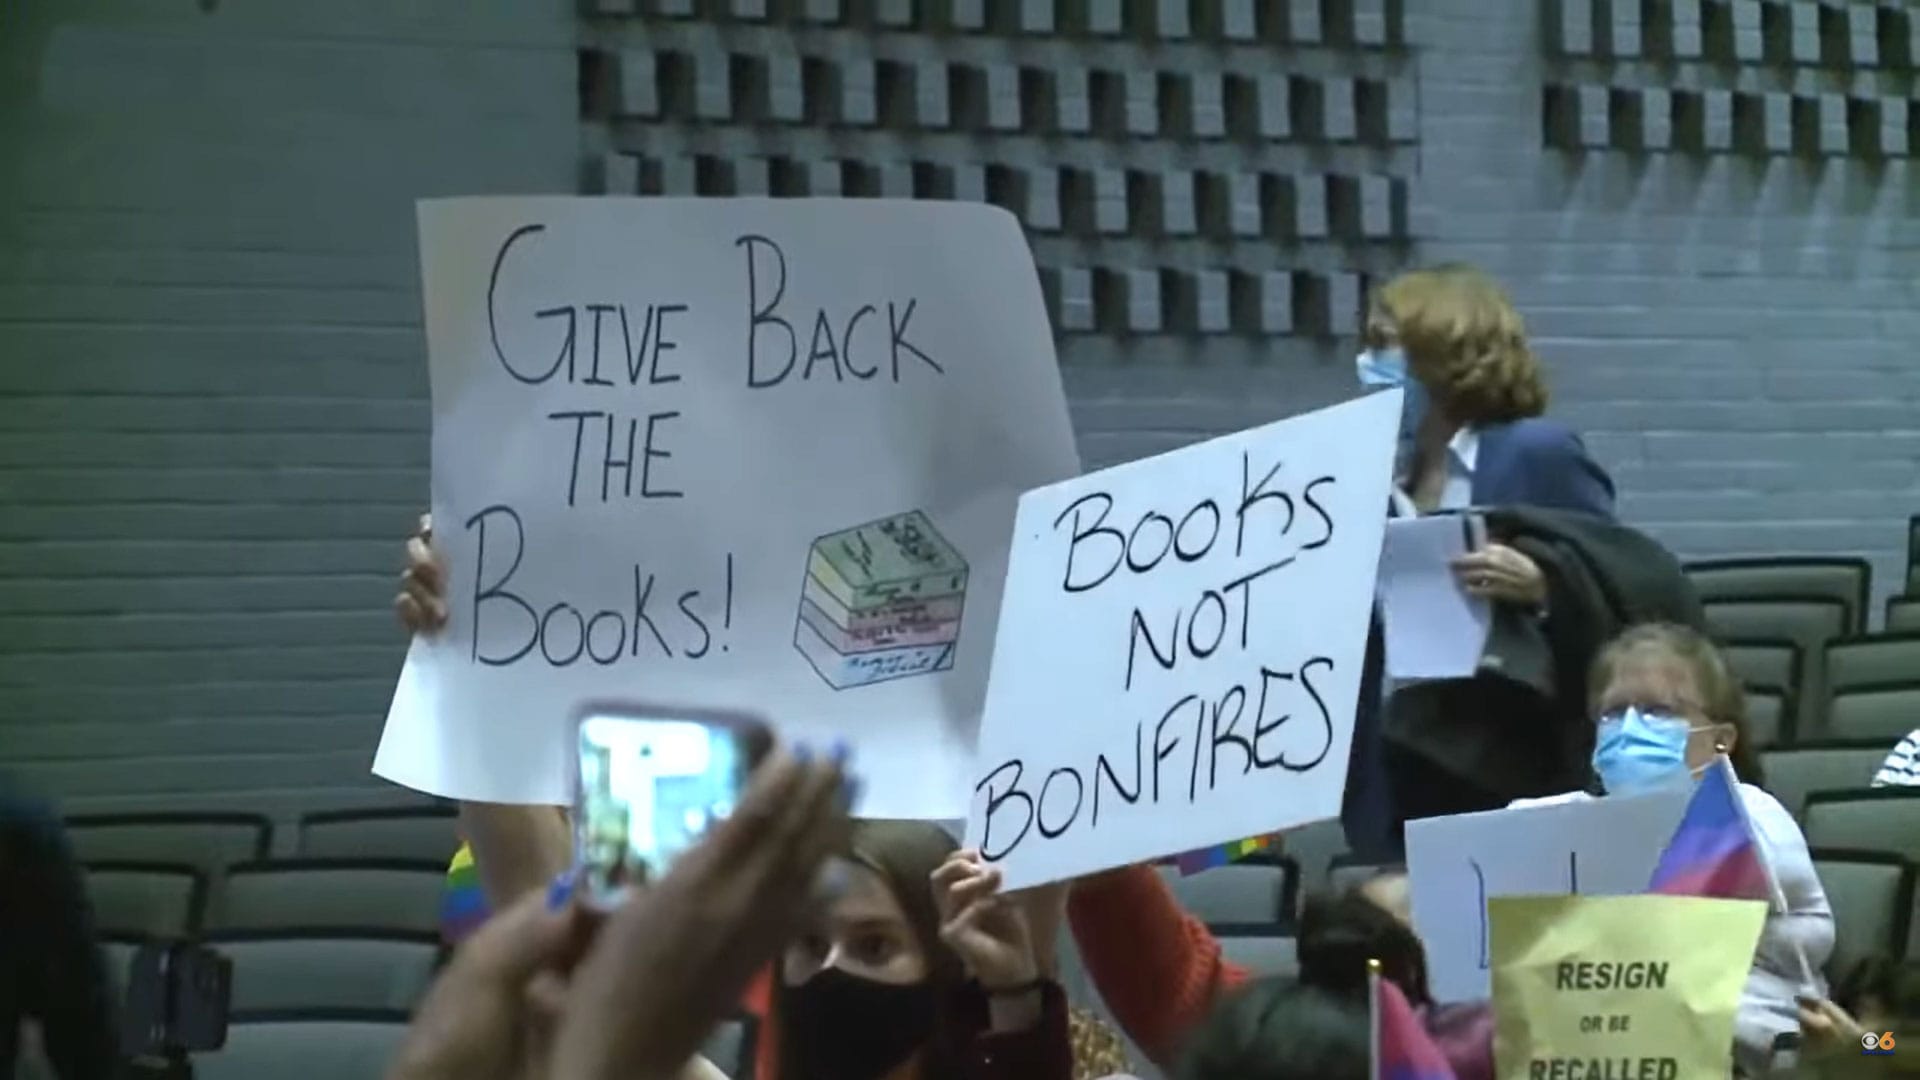 Screenshot from a news clip of a public hearing on book banning in Virginia: signs read "Books Not Bonfires" and "Give Back The Books!"